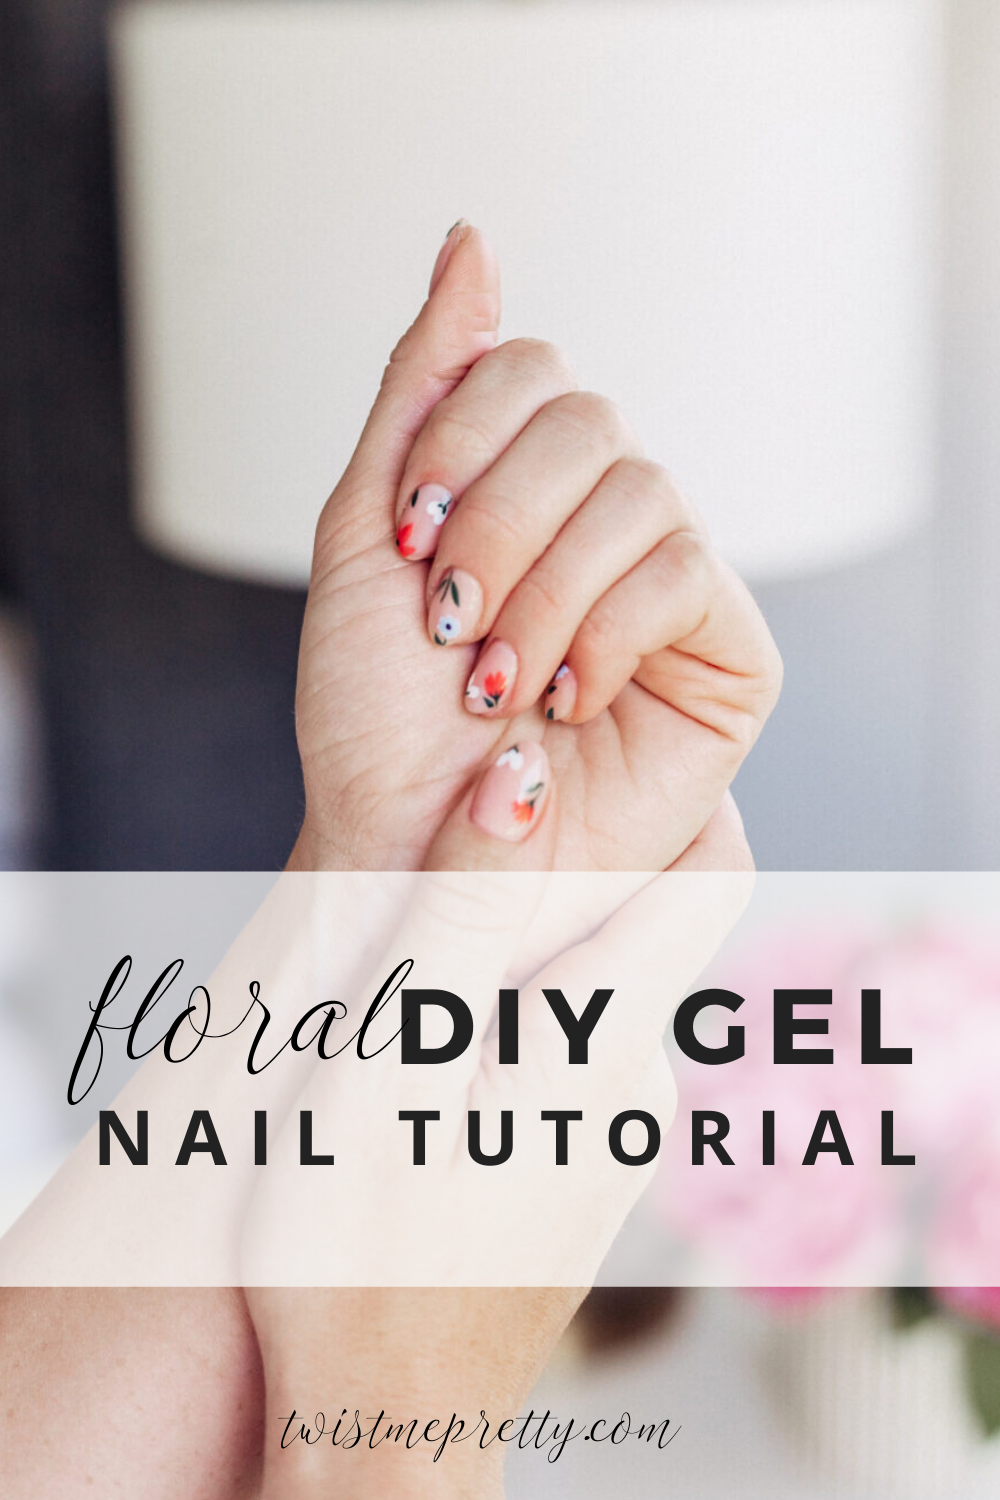 Diy tutorial for gel nails that you can at home! Love these gorgeous floral designs for every season. 